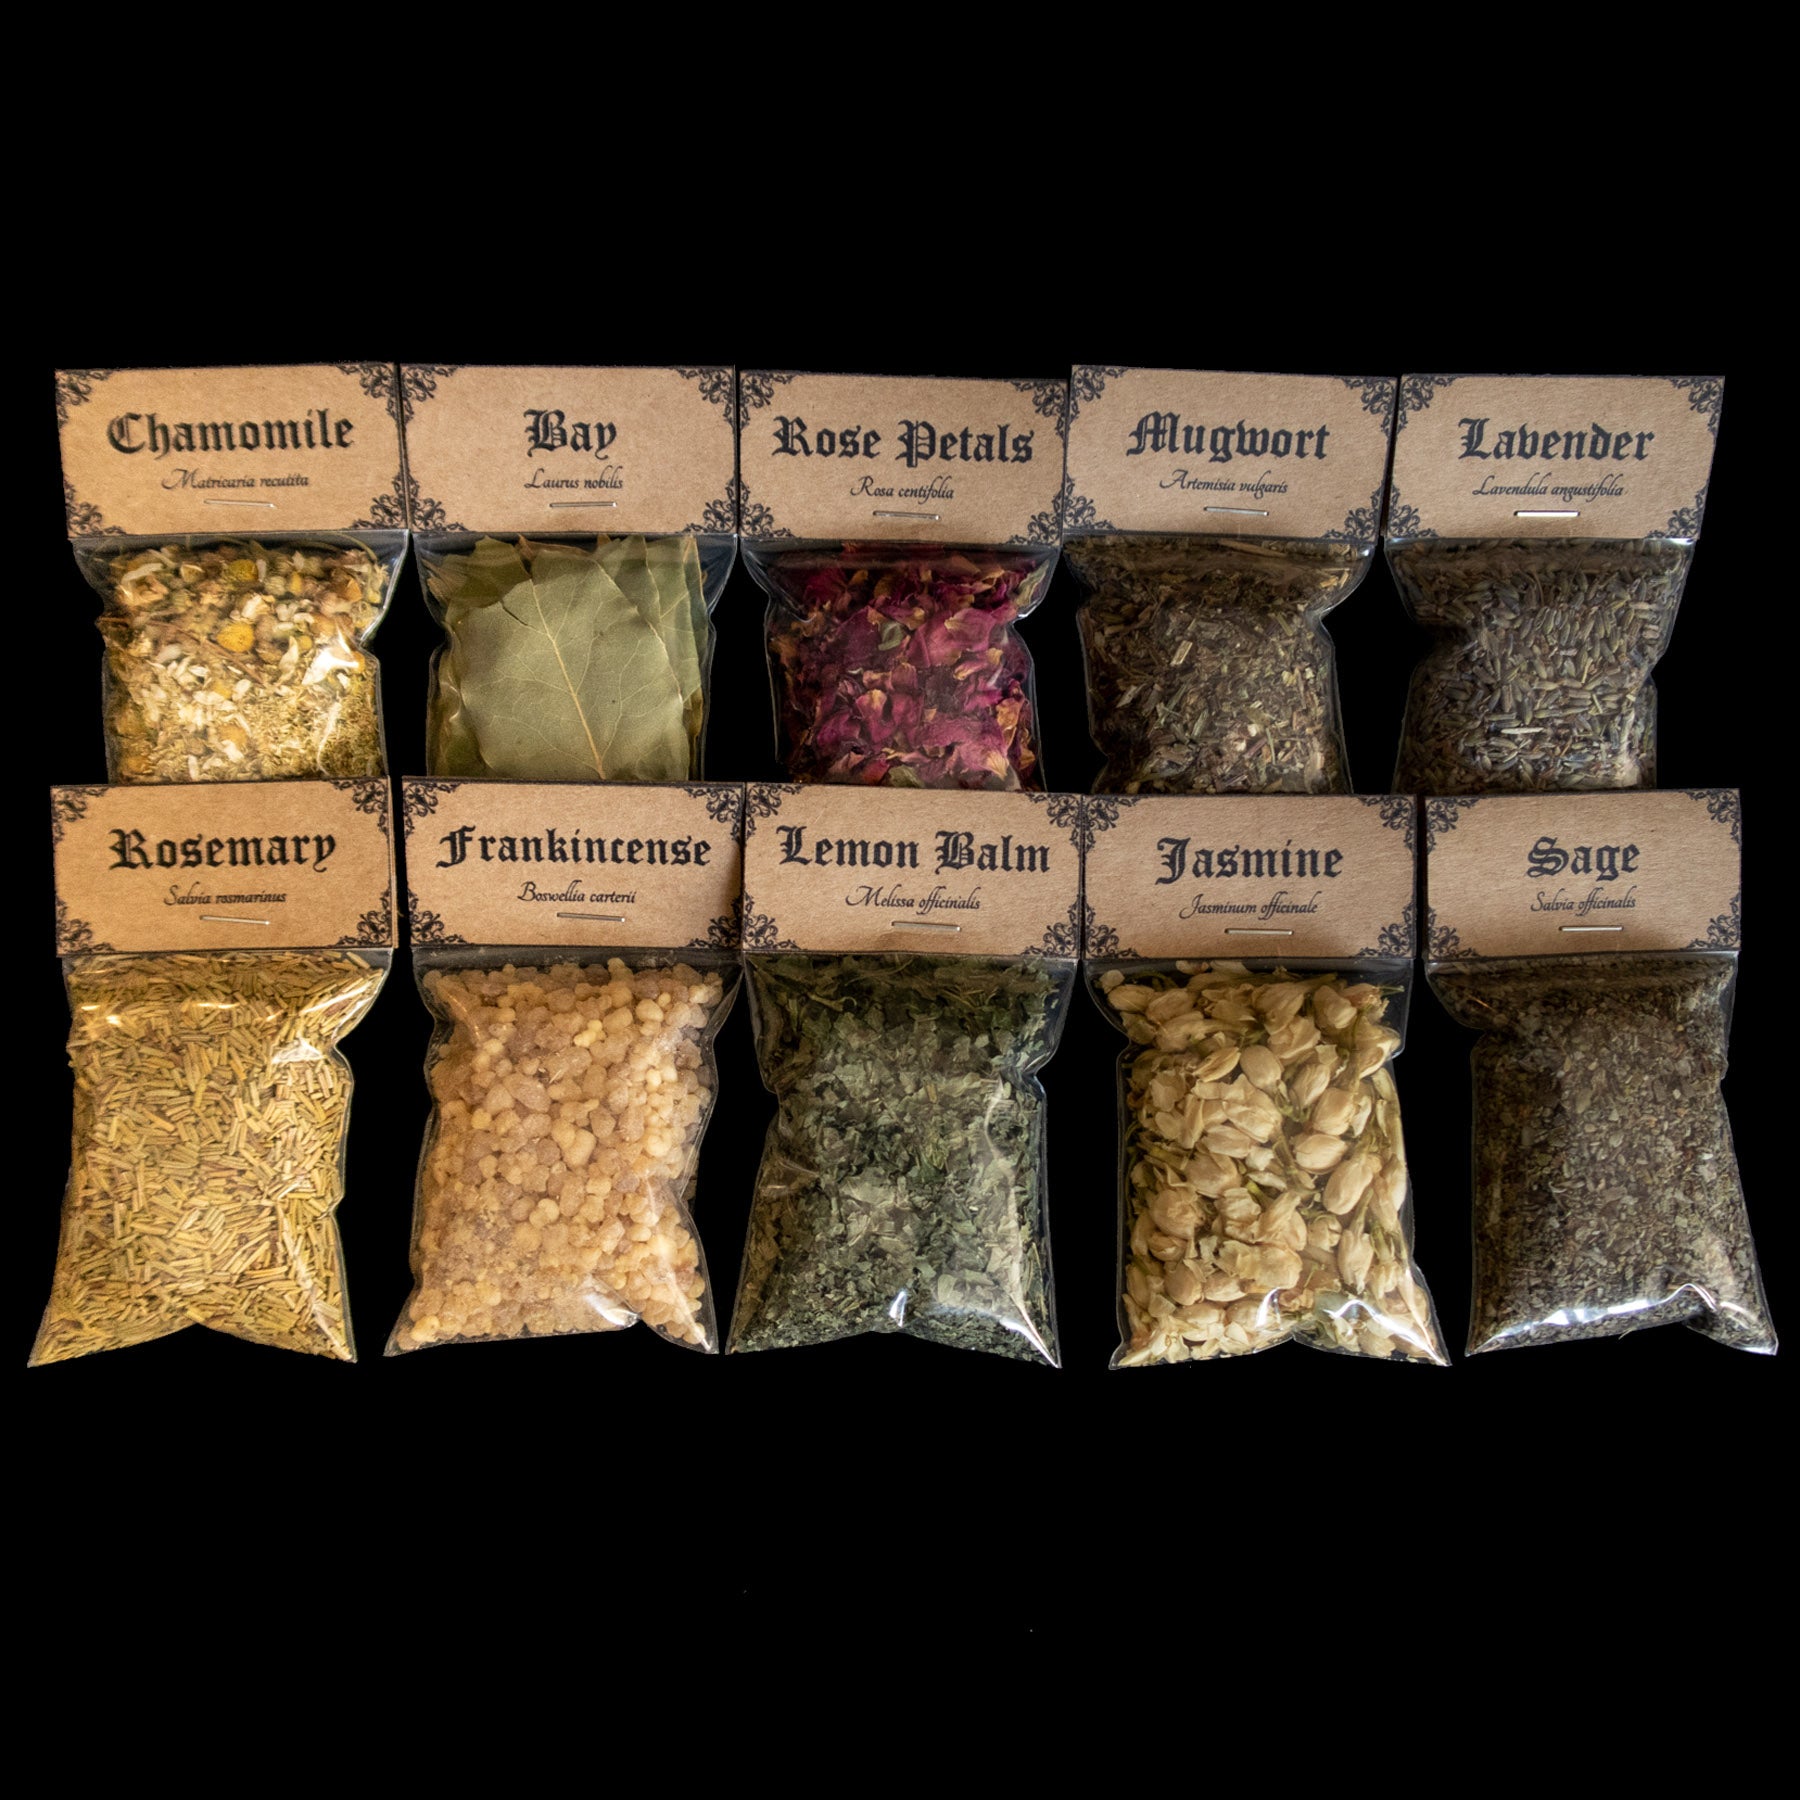 Medium Botanical Favourites kit: A collection of 10 bags of herbs - Victorian-apothecary-style brown labels at the top give the common and Latin names